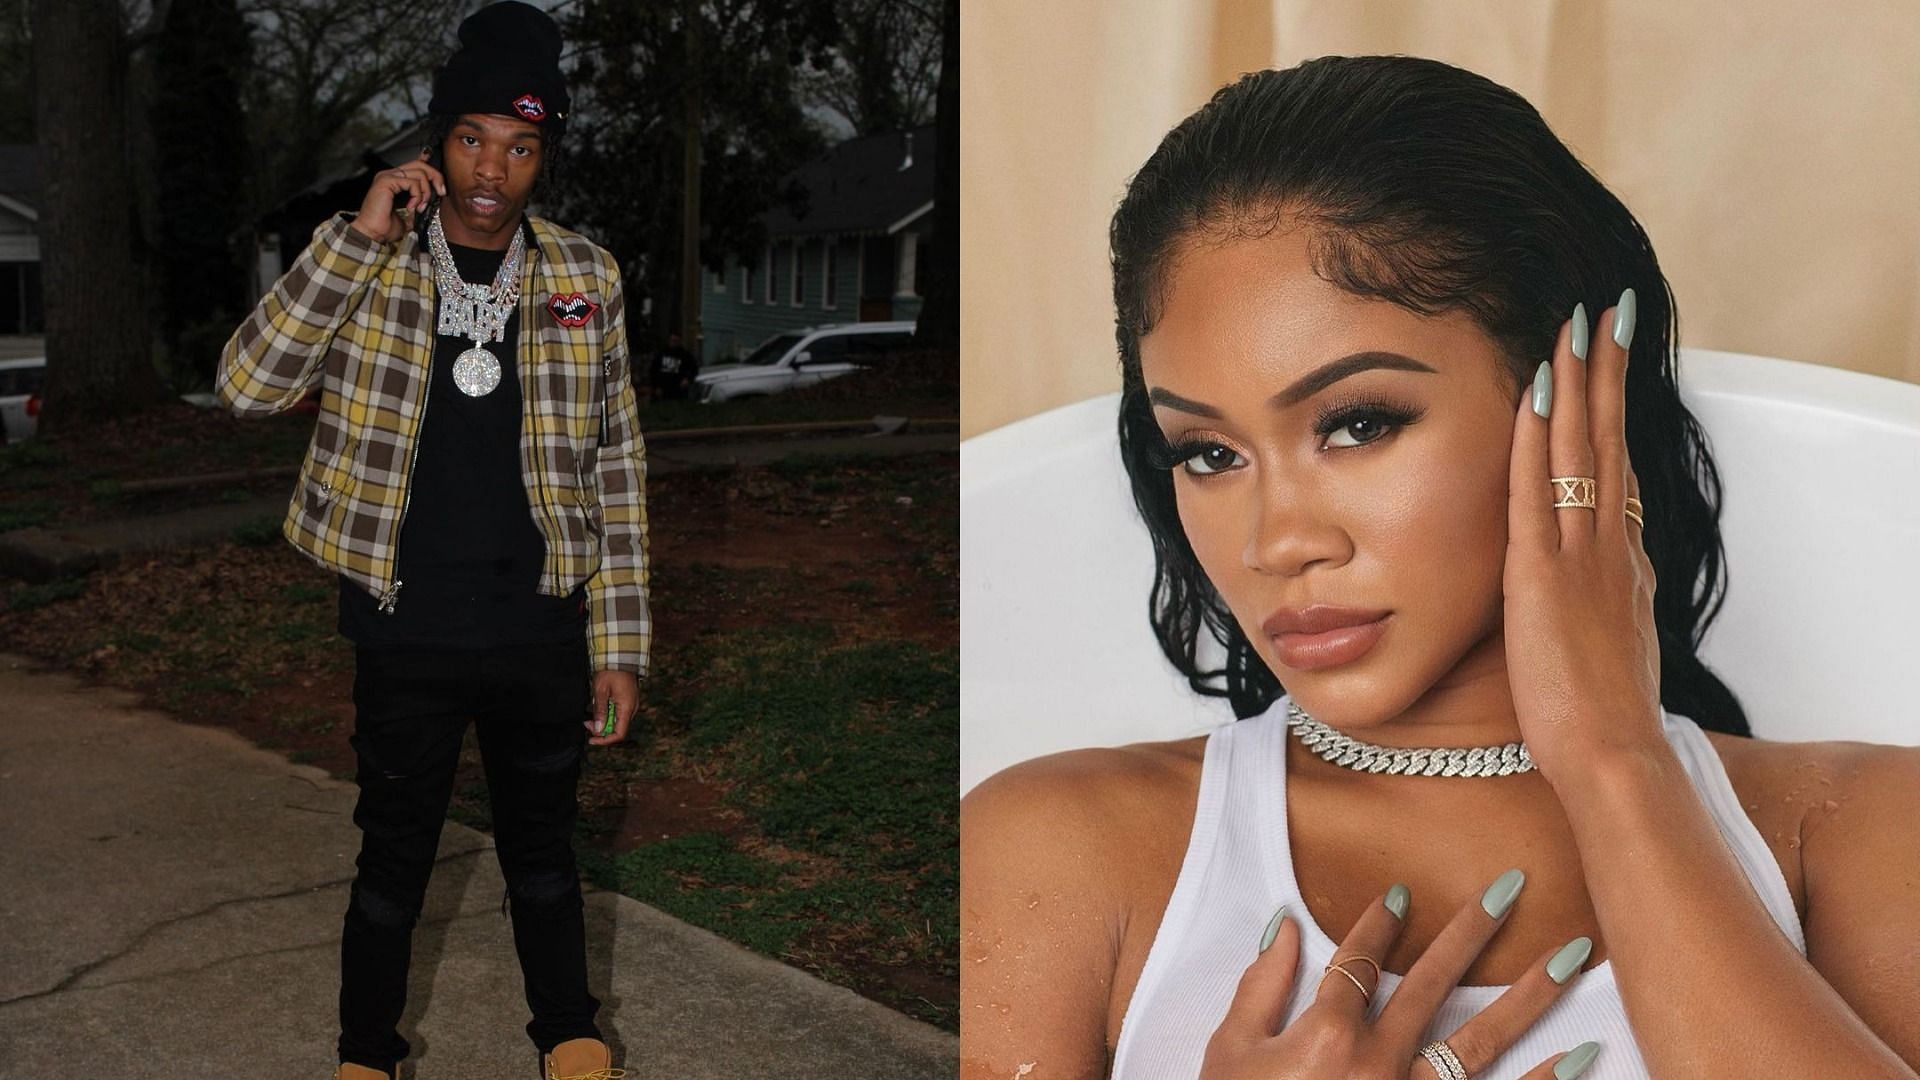 Social media users responded to Saweetie and Lil Baby dating rumors with a barrage of memes (Image via Lil Baby/Instagram and Saweetie/Instagram)